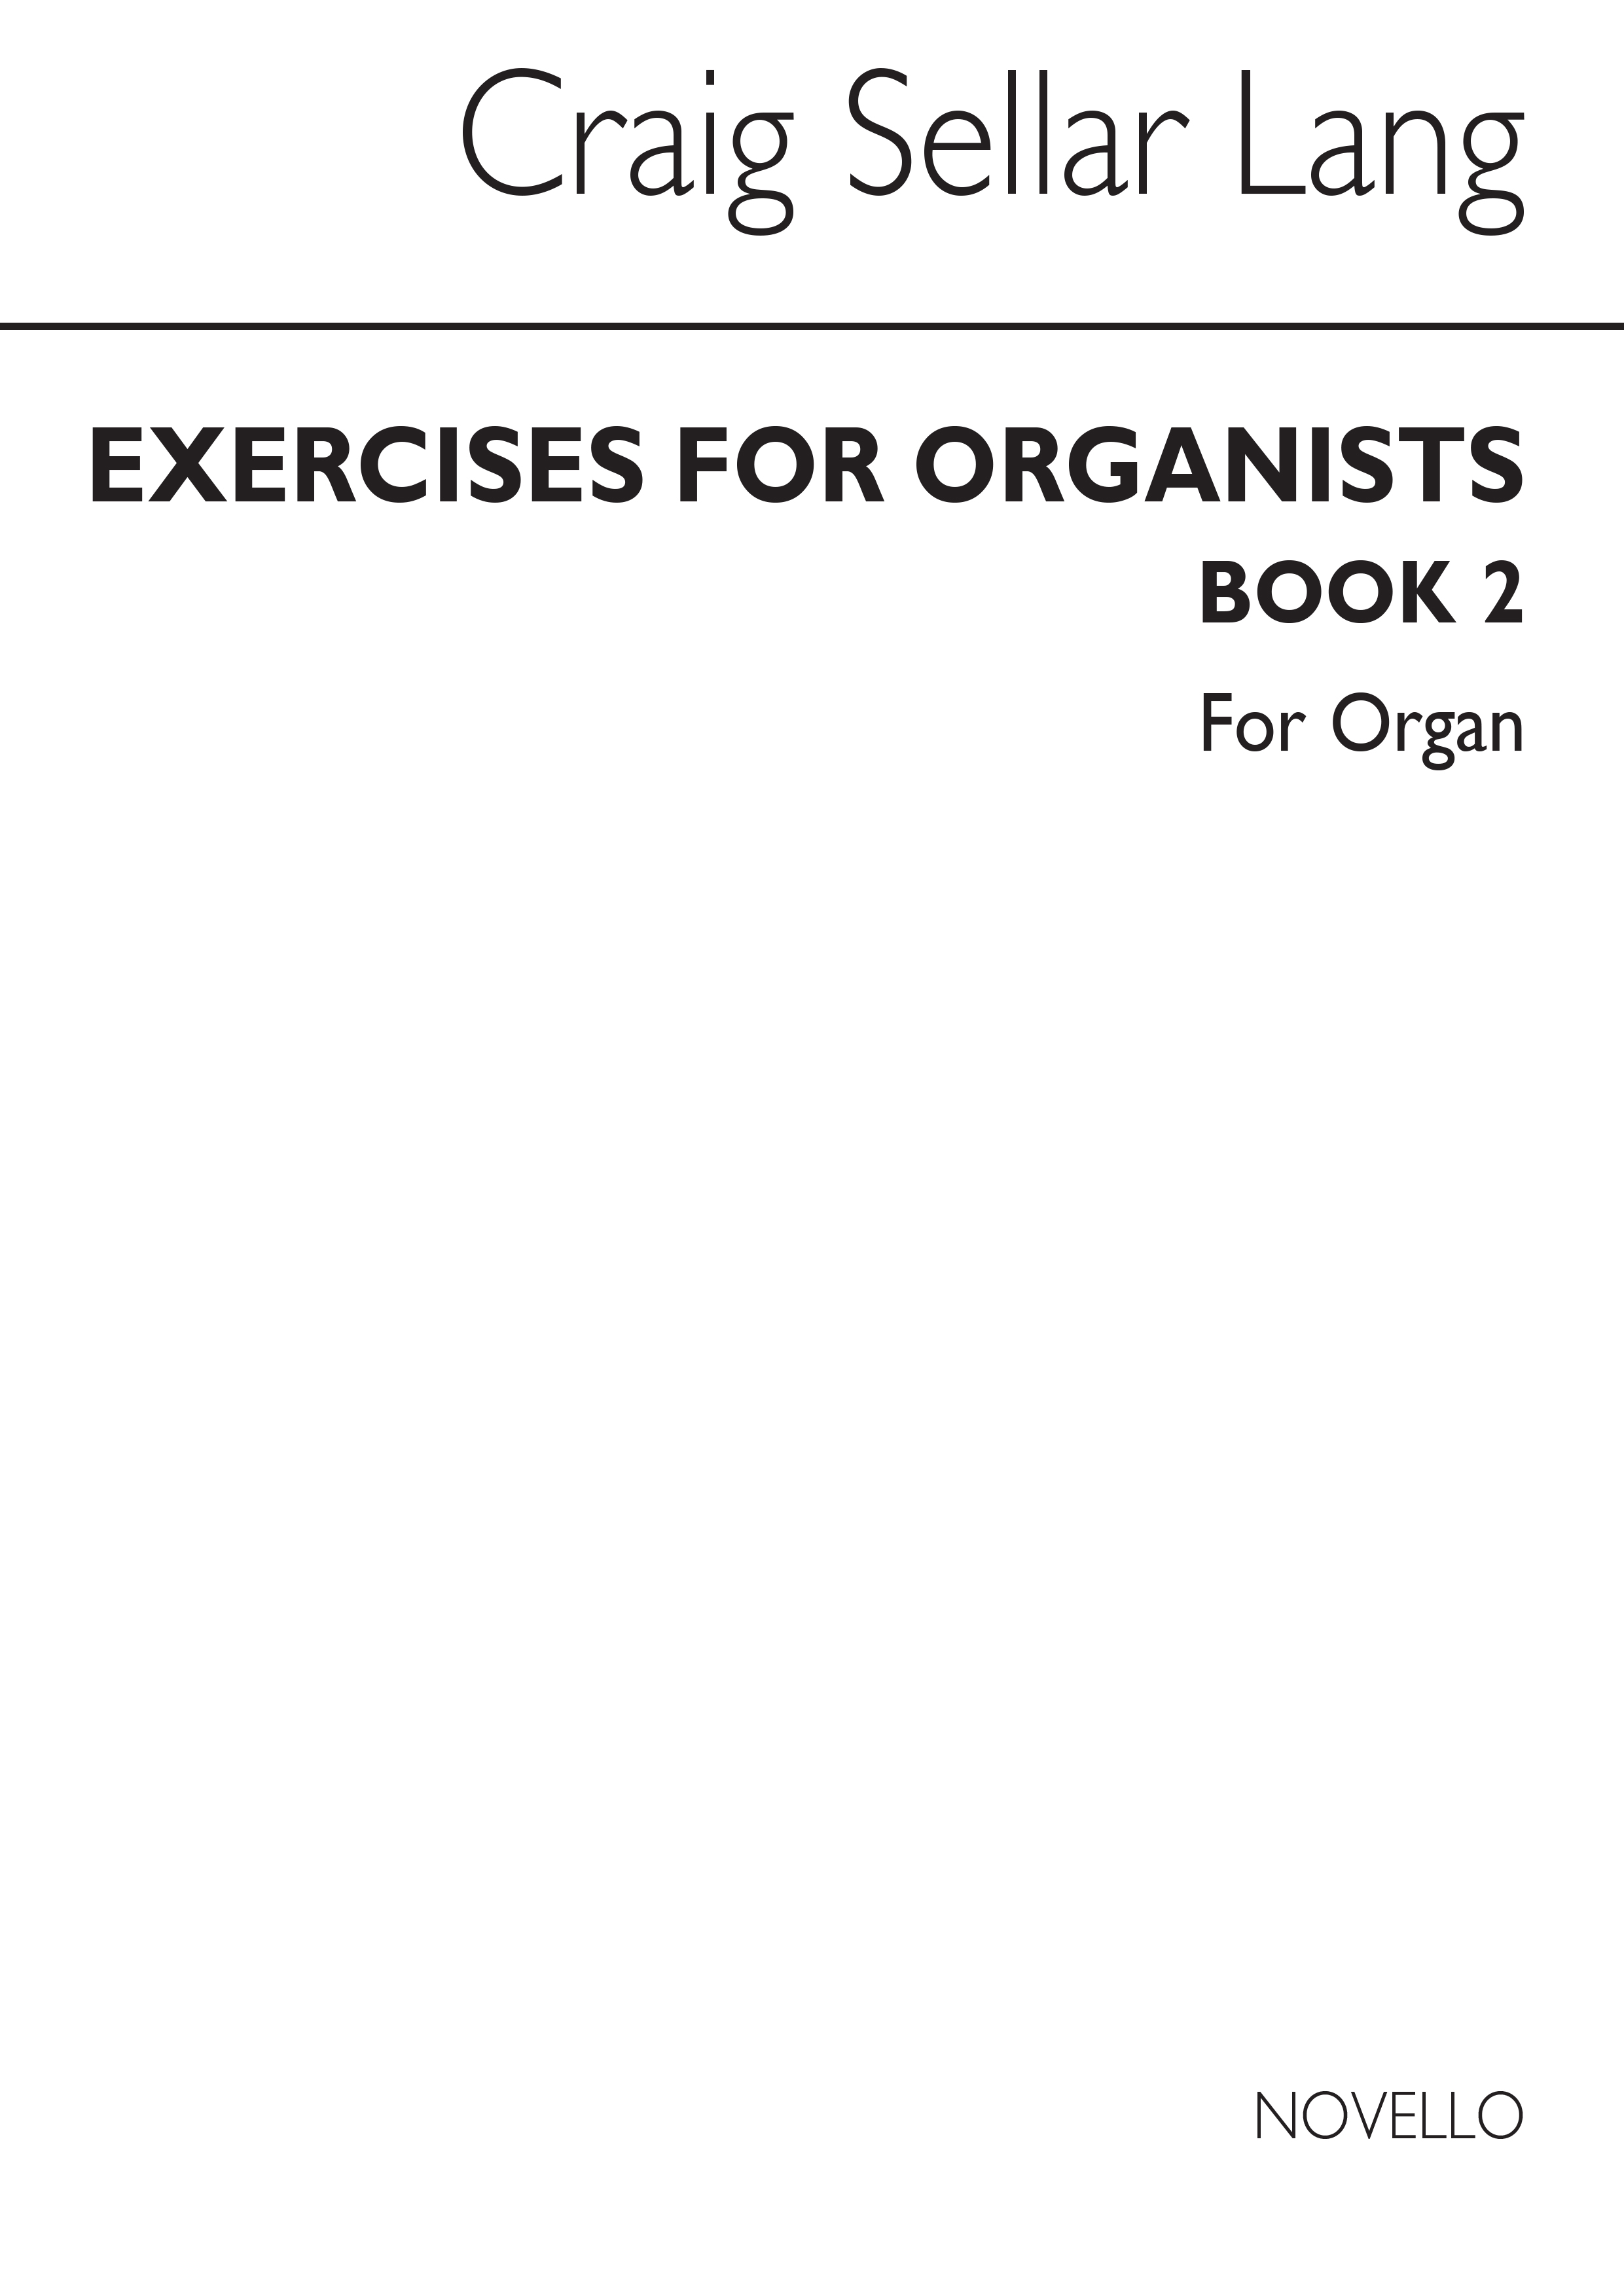 C.S. Lang: Exercises For Organists, Book 2